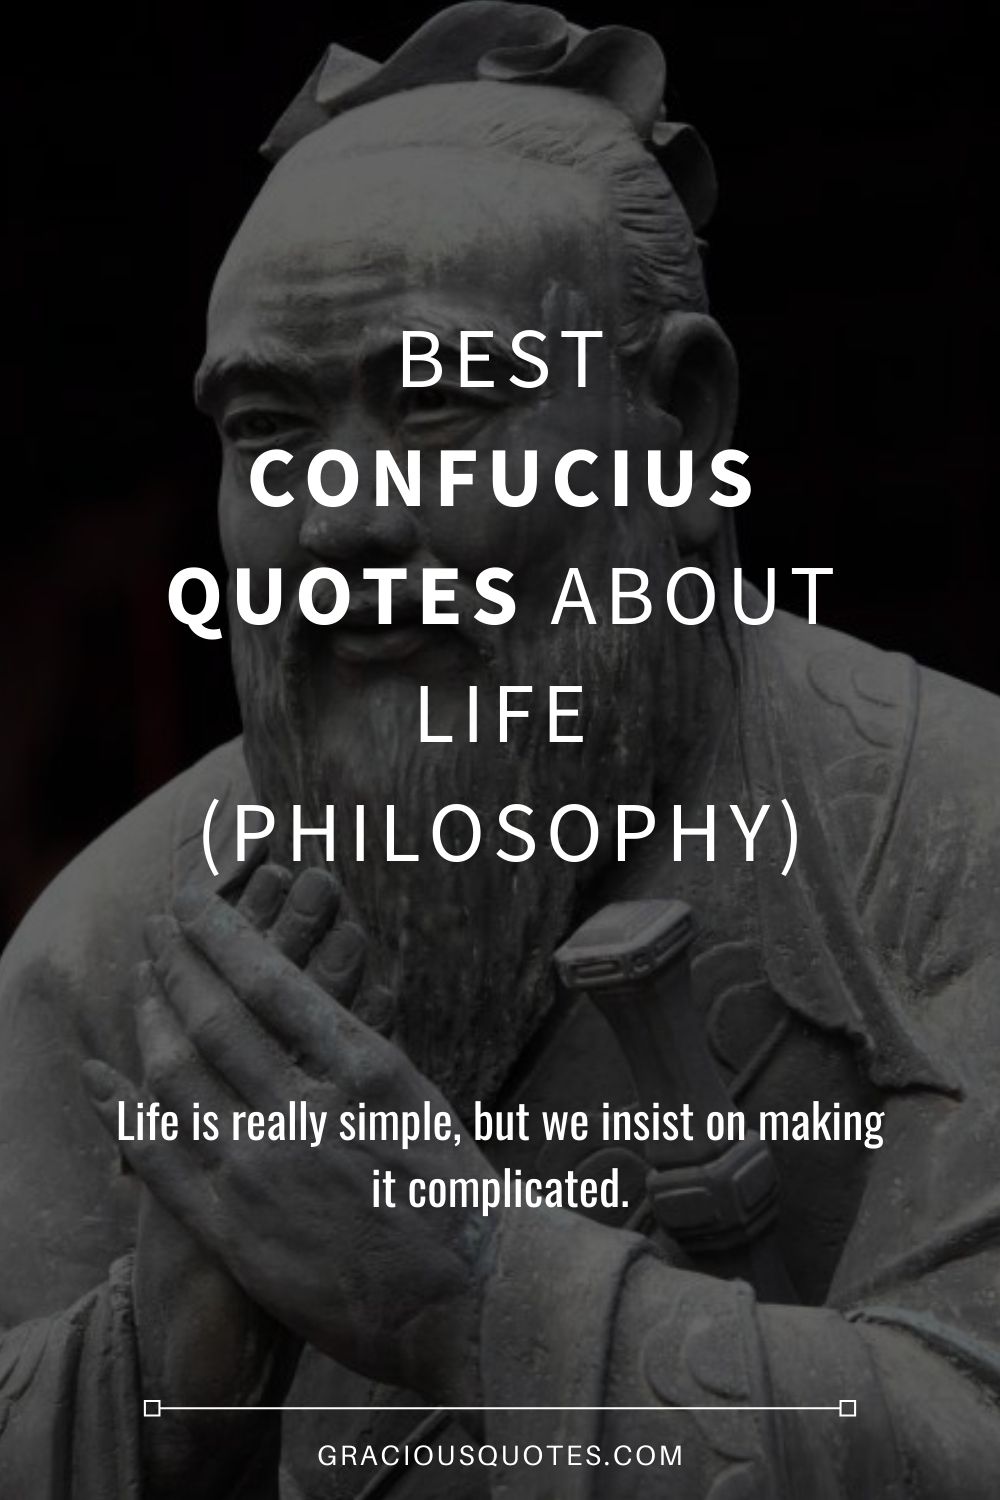 94 Best Confucius Quotes About Life (PHILOSOPHY) - Gracious Quotes